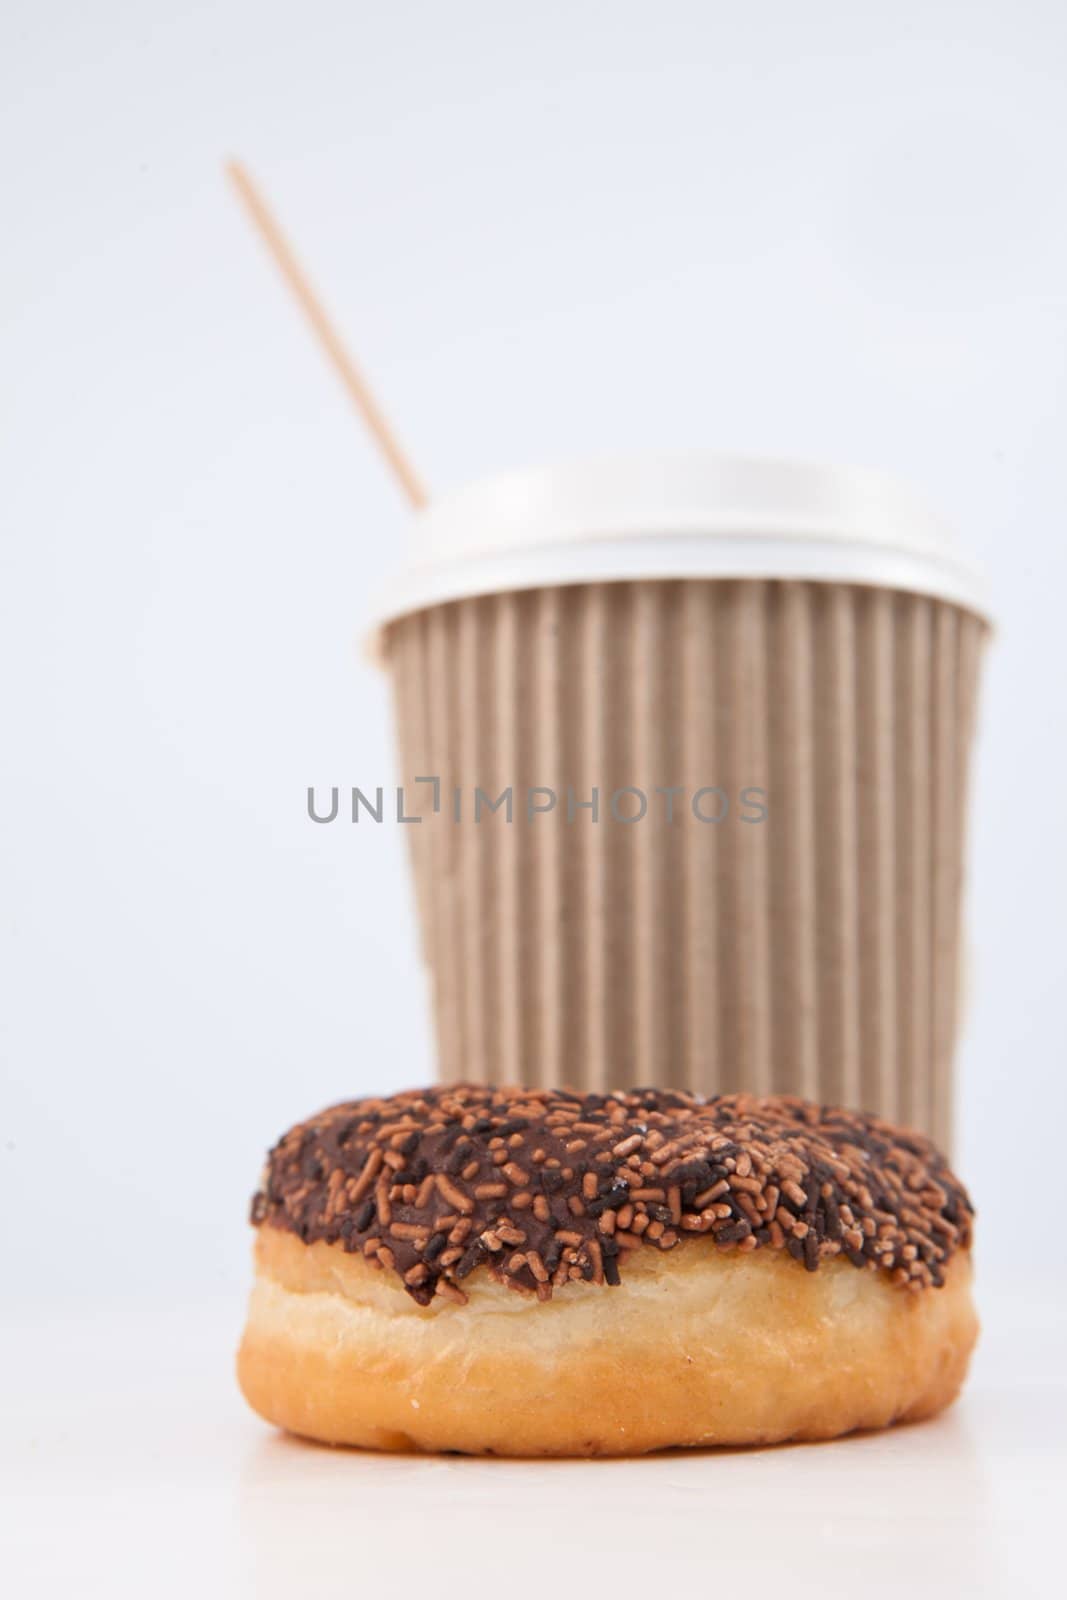 A doughnut and a cup of coffee placed together against a white background